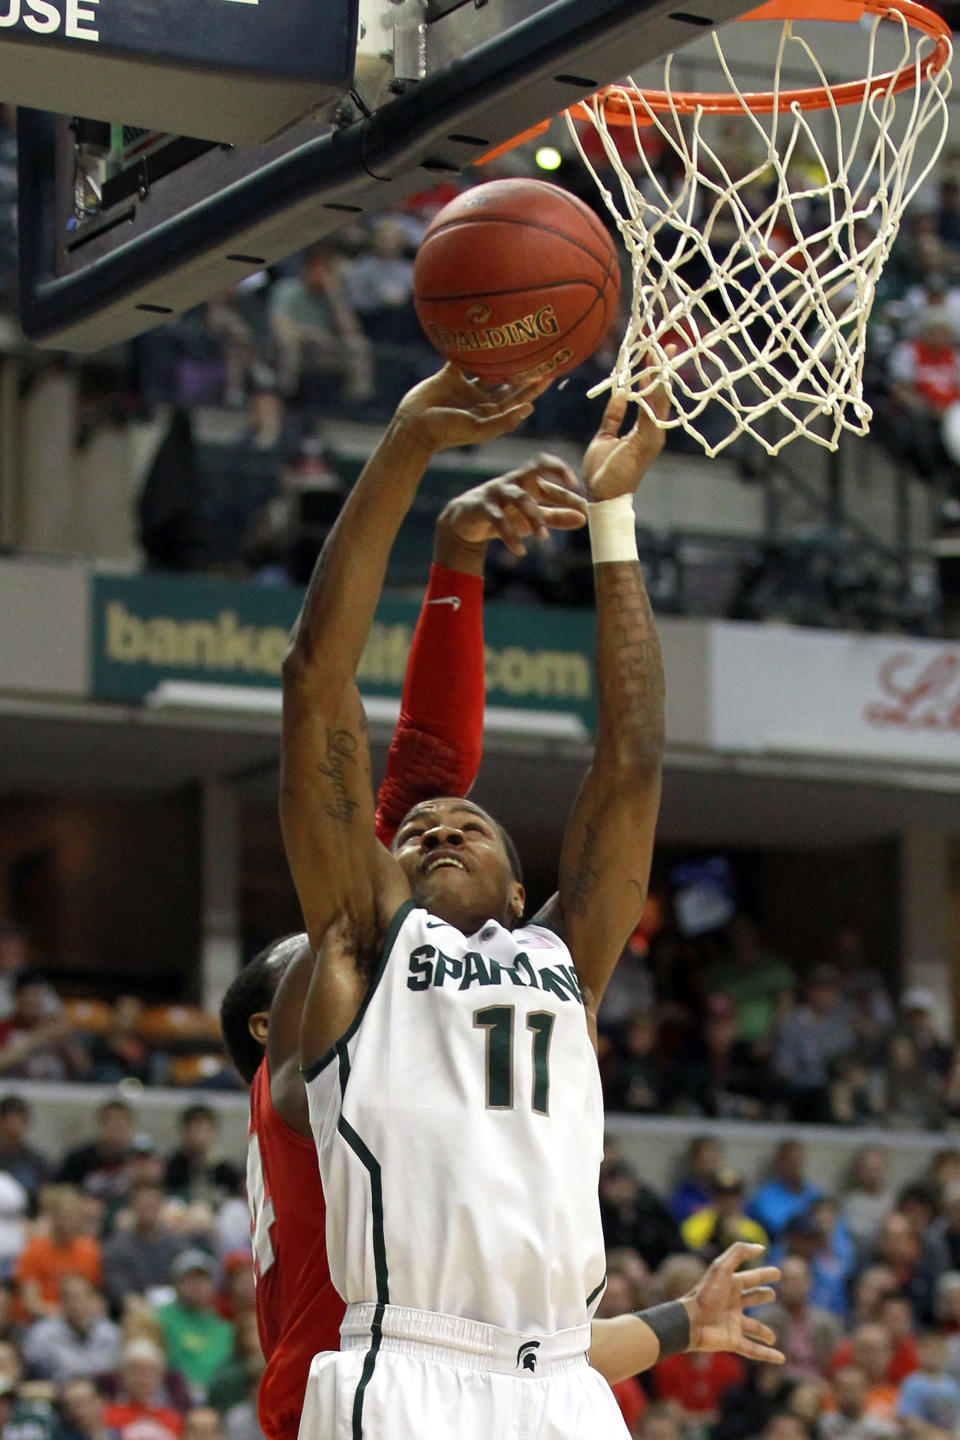 INDIANAPOLIS, IN - MARCH 11: Keith Appling #11 of the Michigan State Spartans attempts a shot against the Ohio State Buckeyes during the Final Game of the 2012 Big Ten Men's Conference Basketball Tournament at Bankers Life Fieldhouse on March 11, 2012 in Indianapolis, Indiana. (Photo by Andy Lyons/Getty Images)